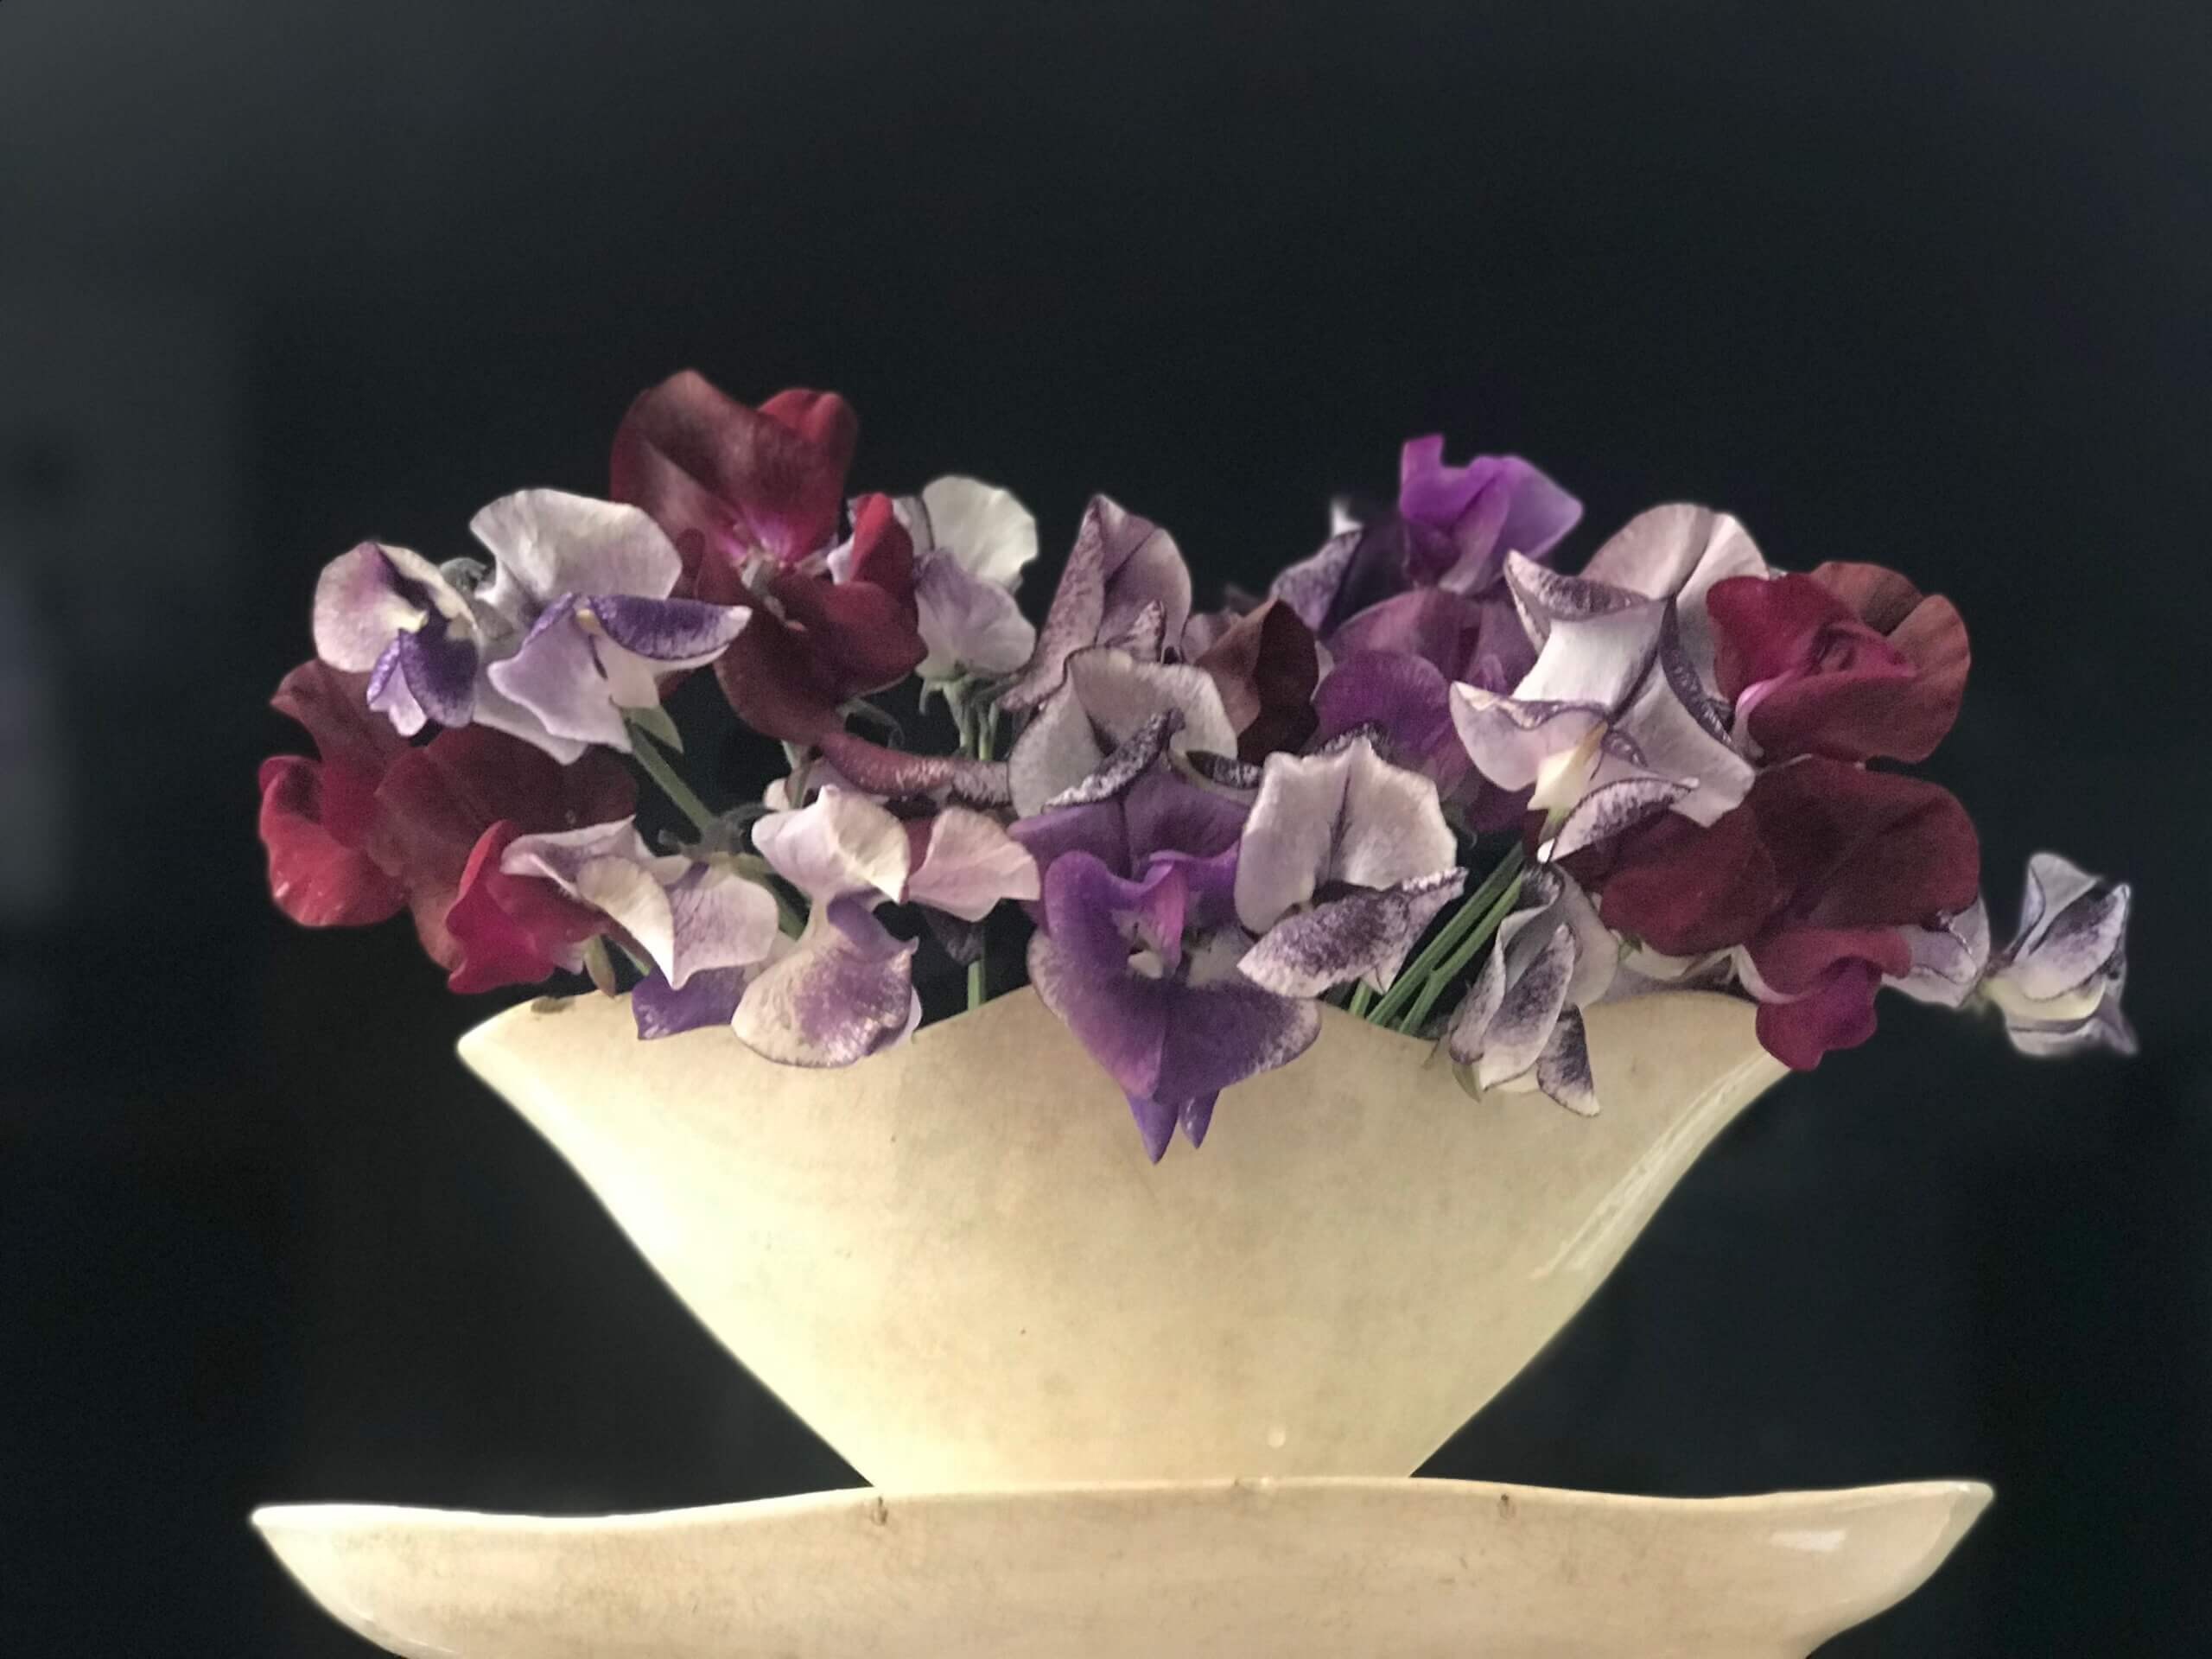 sweetpeas in a french vase on lack background